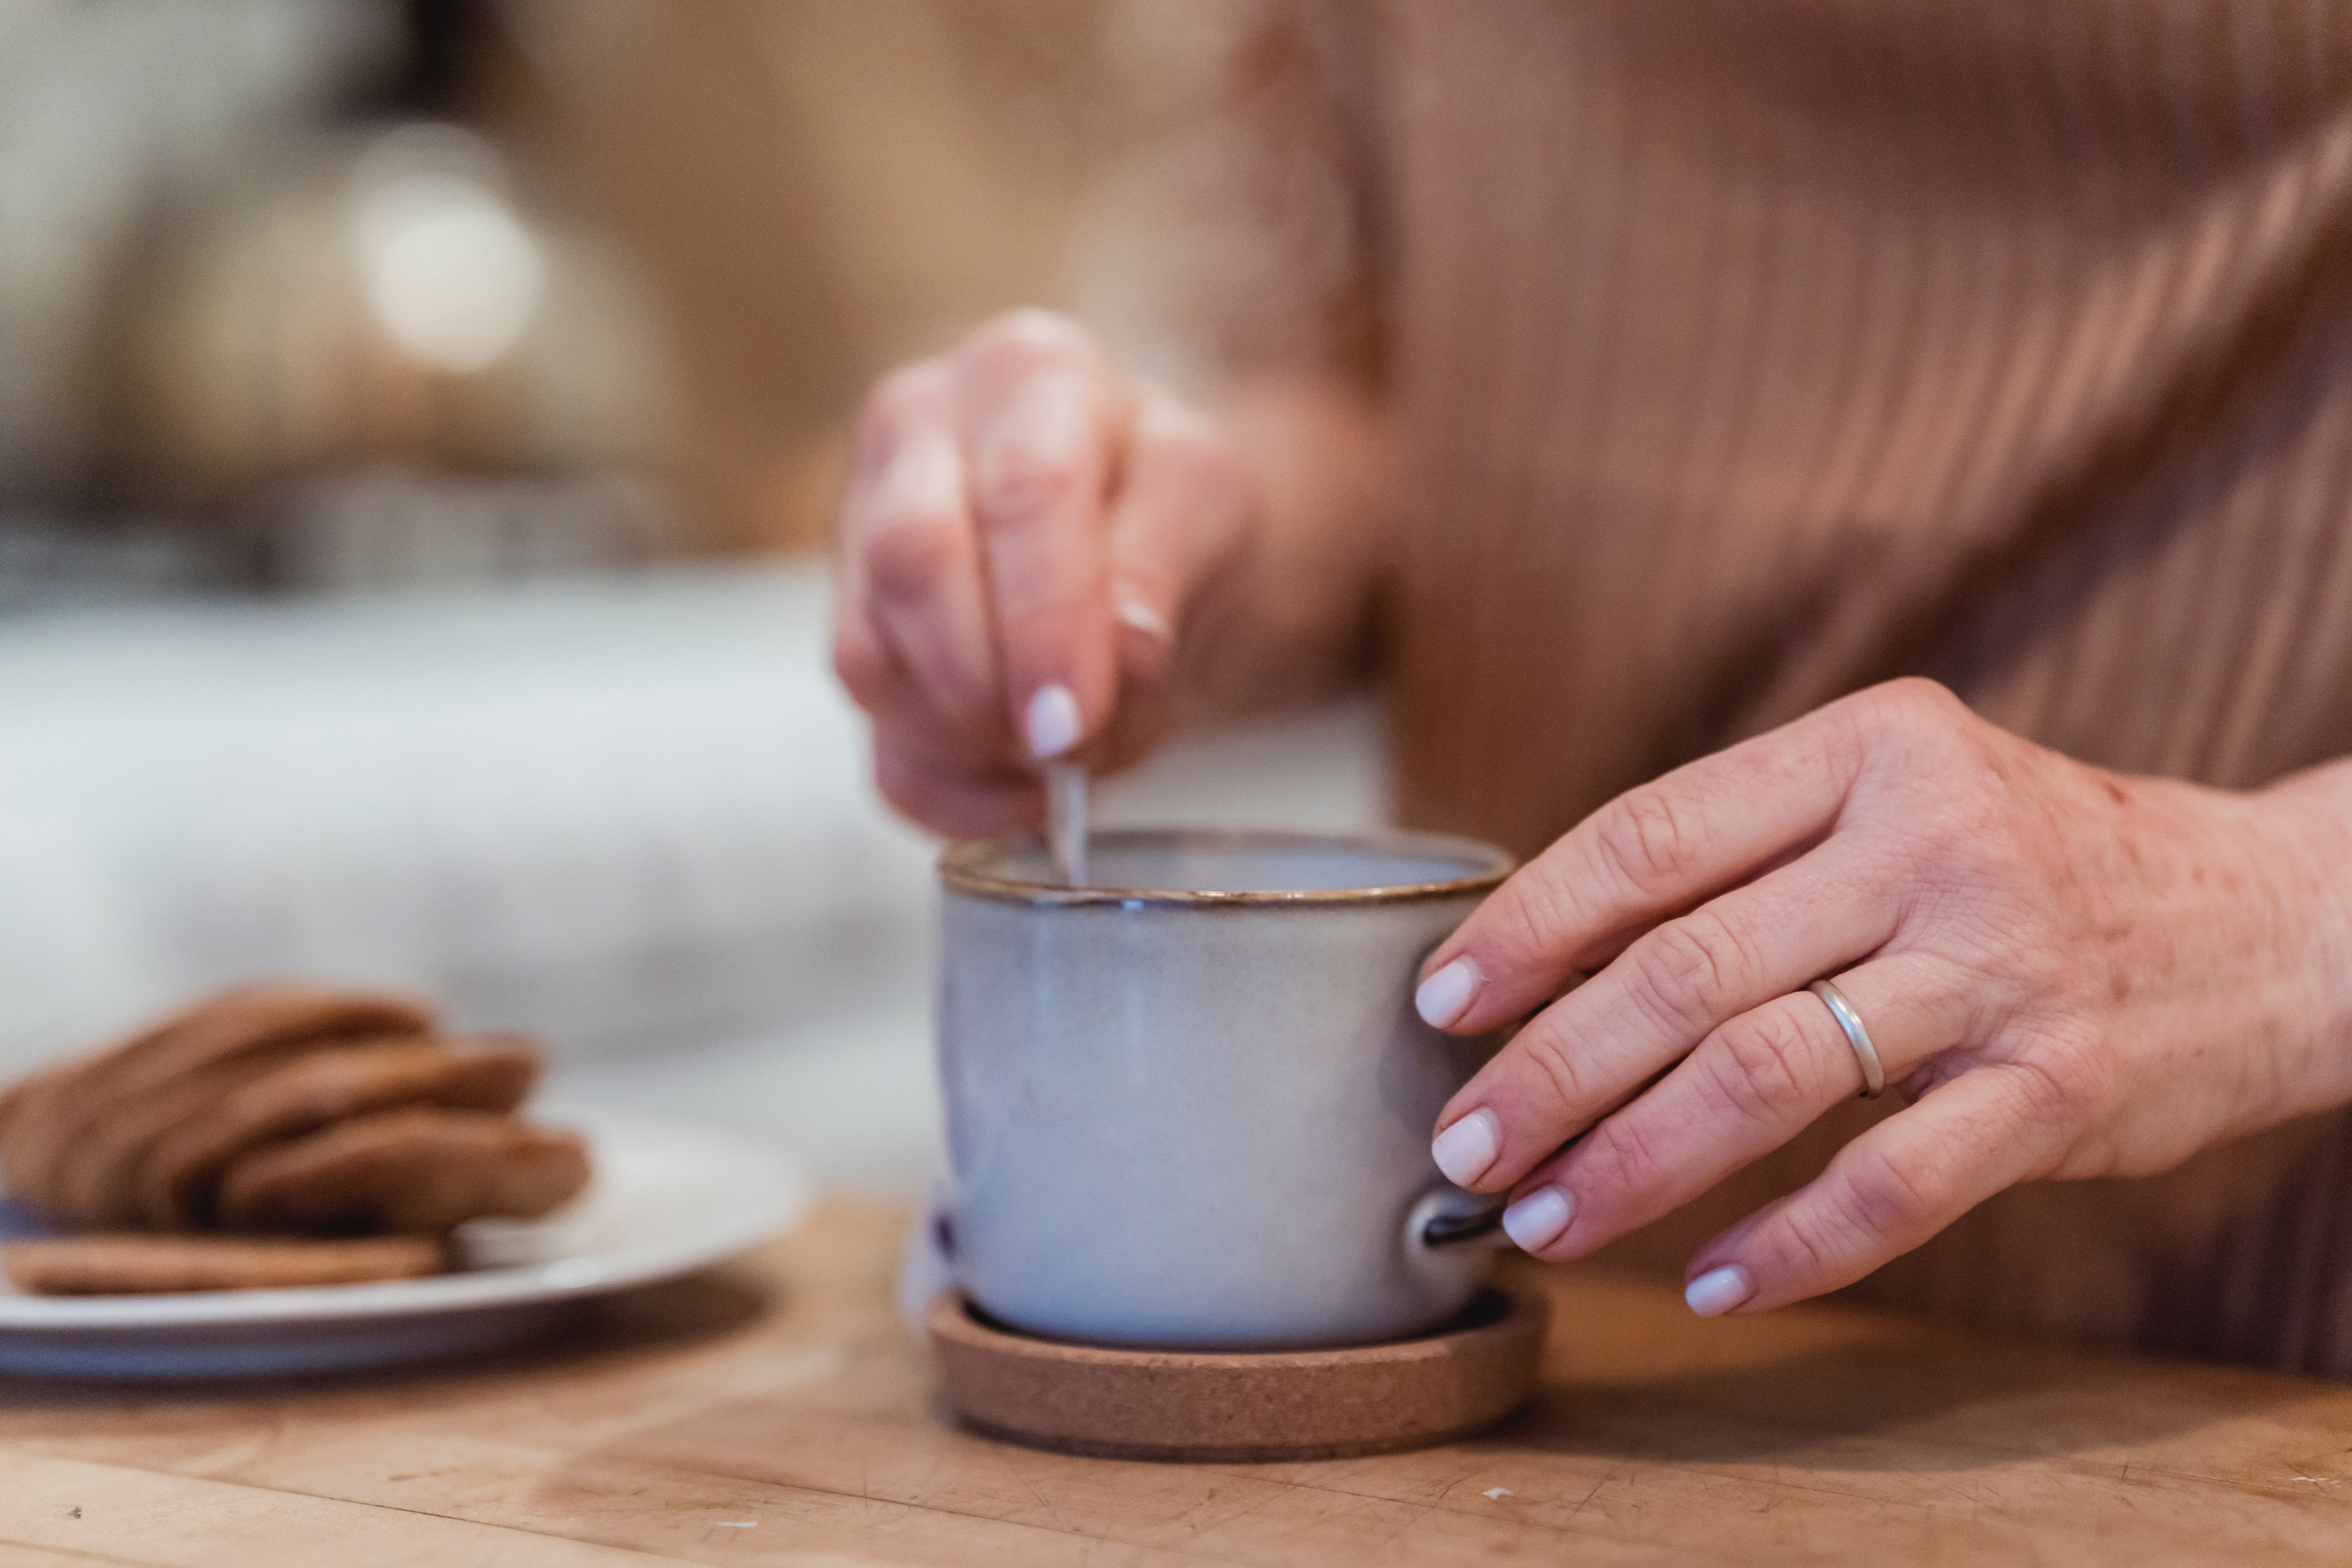 Mrs. Miller served tea and cookies to Lily. | Source: Pexels